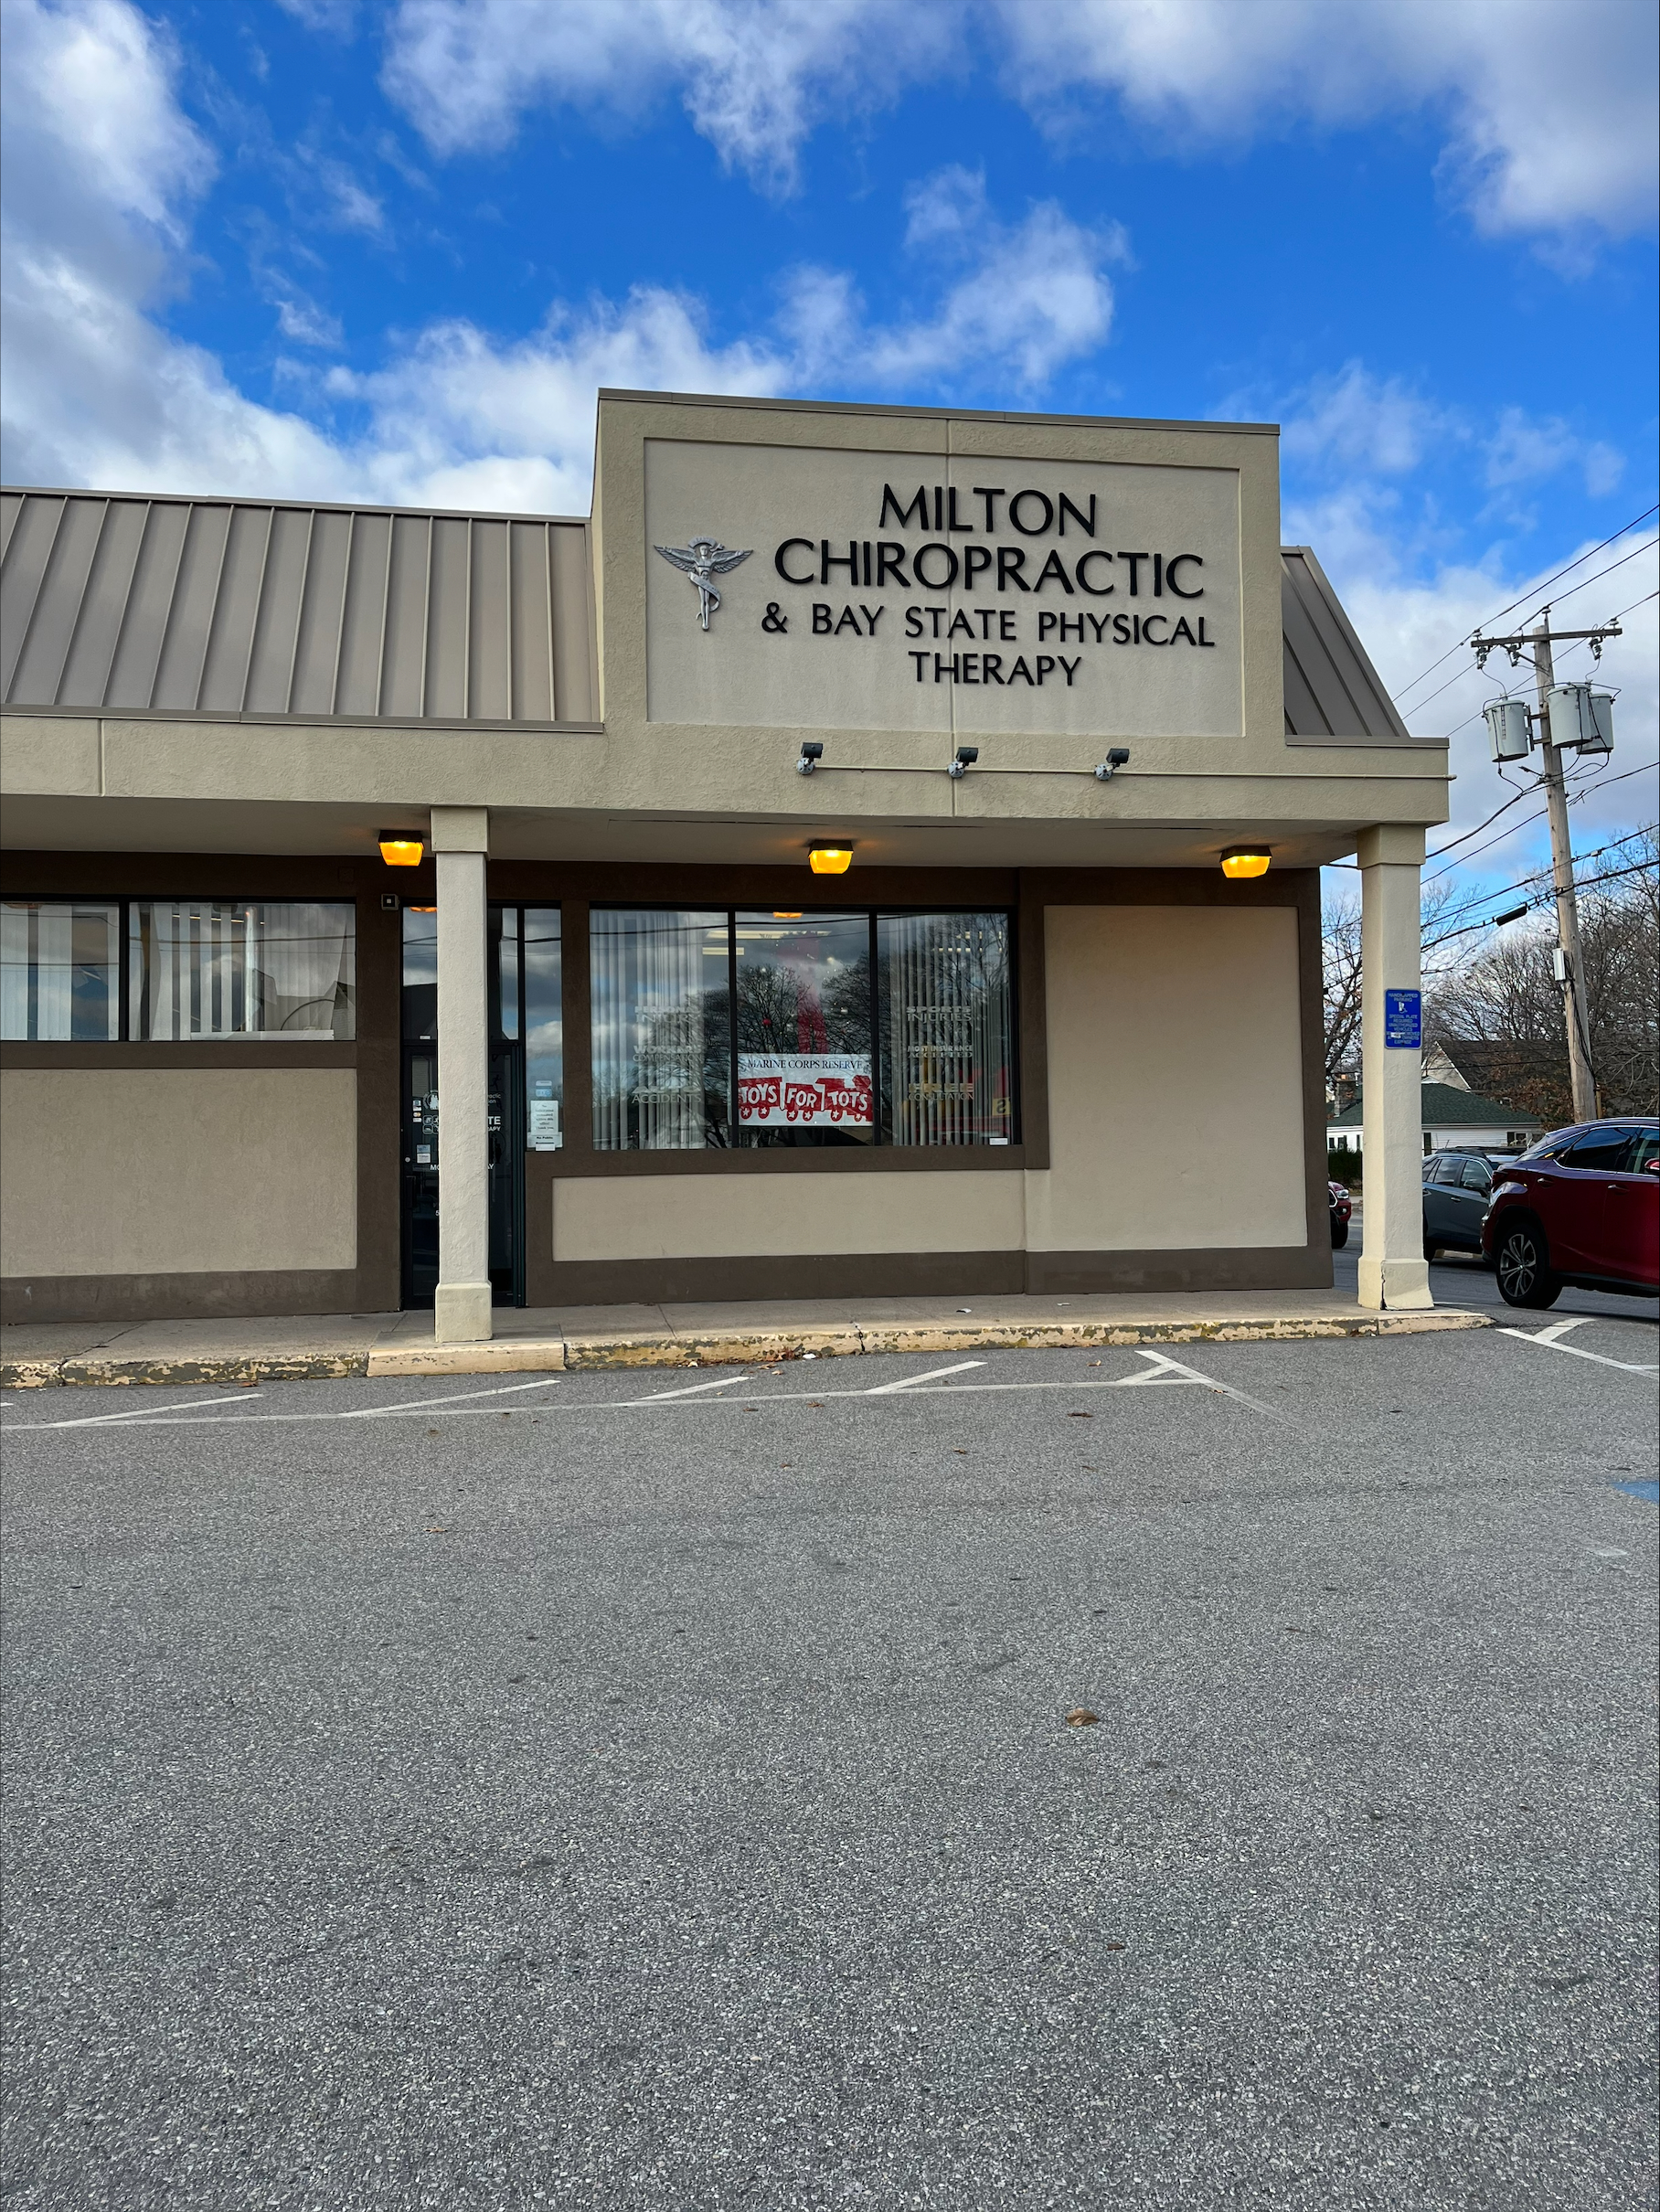 Bay State Physical Therapy Attleboro (508)761-5945